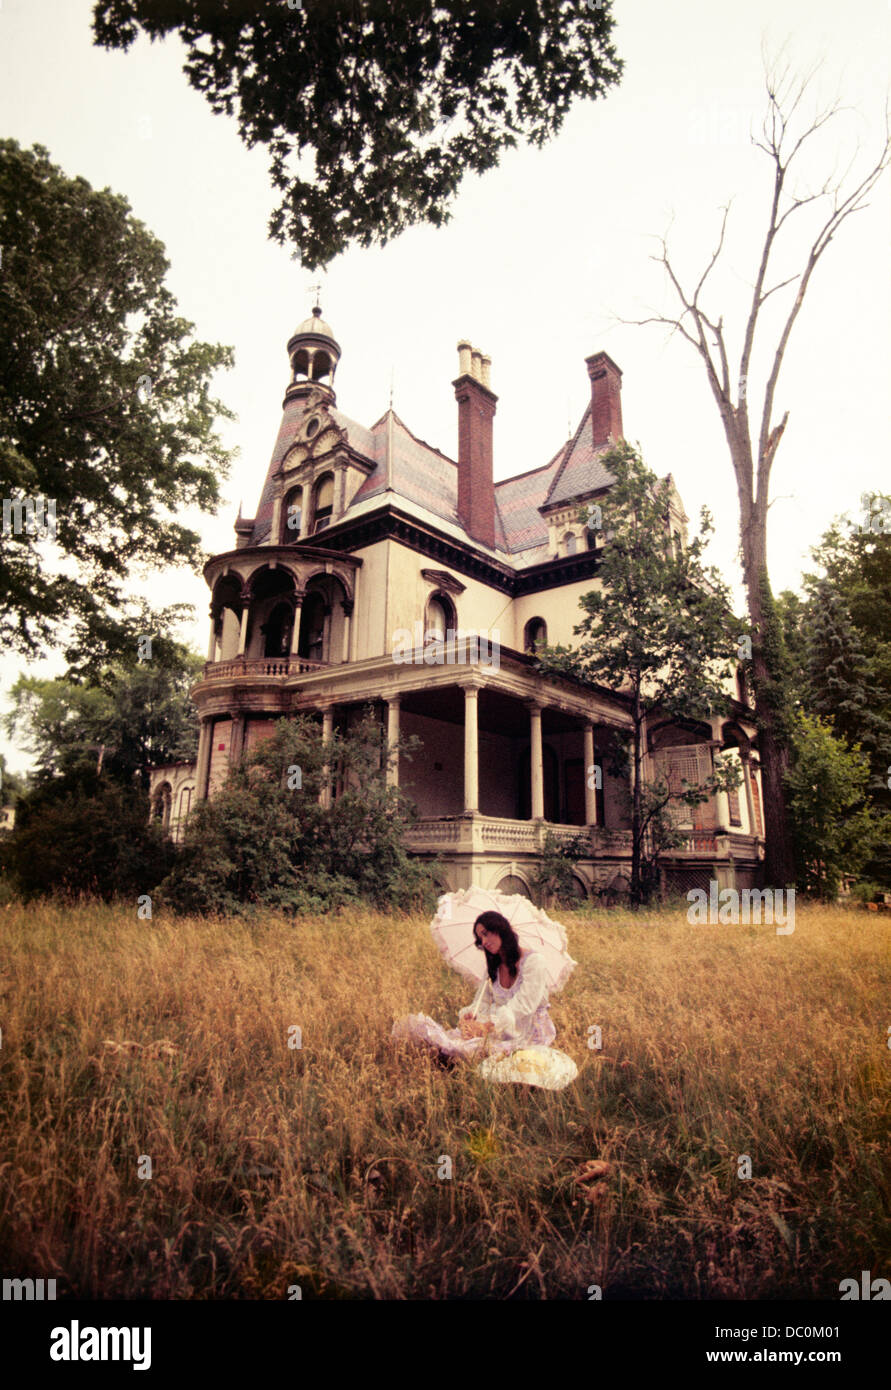 1960s 1970s WOMAN UNDER PARASOL SITTING FRONT OF ABANDONED HAUNTED VICTORIAN HOUSE Stock Photo